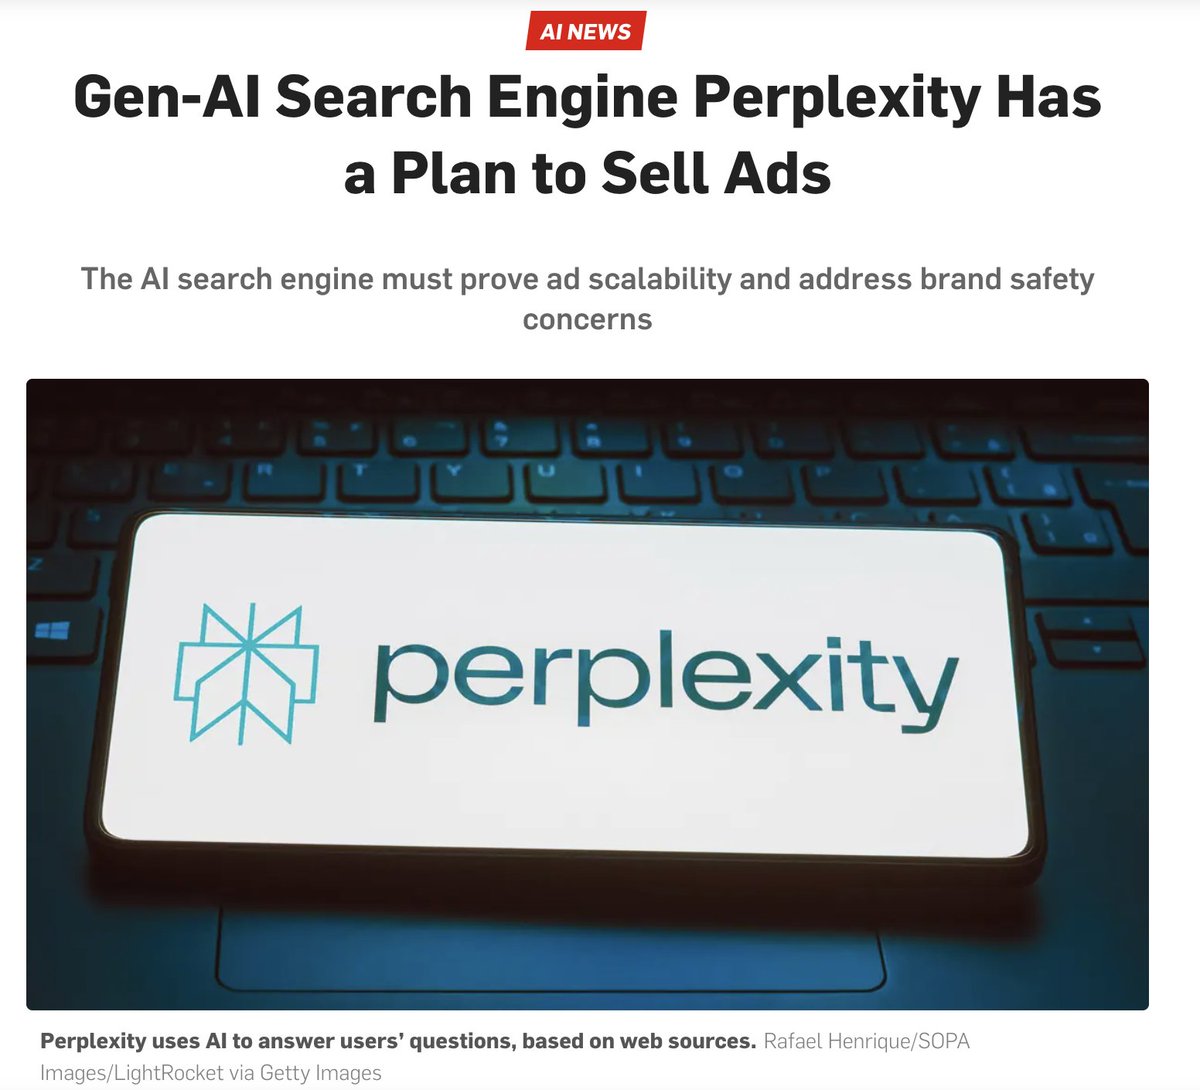 Perplexity whose website states web search should be “free from the influence of advertising-driven models” now plans to introduce ads. This was an obvious flip flop since there's no way to justify their valuation with a paid search service when Google's AI experience is free.